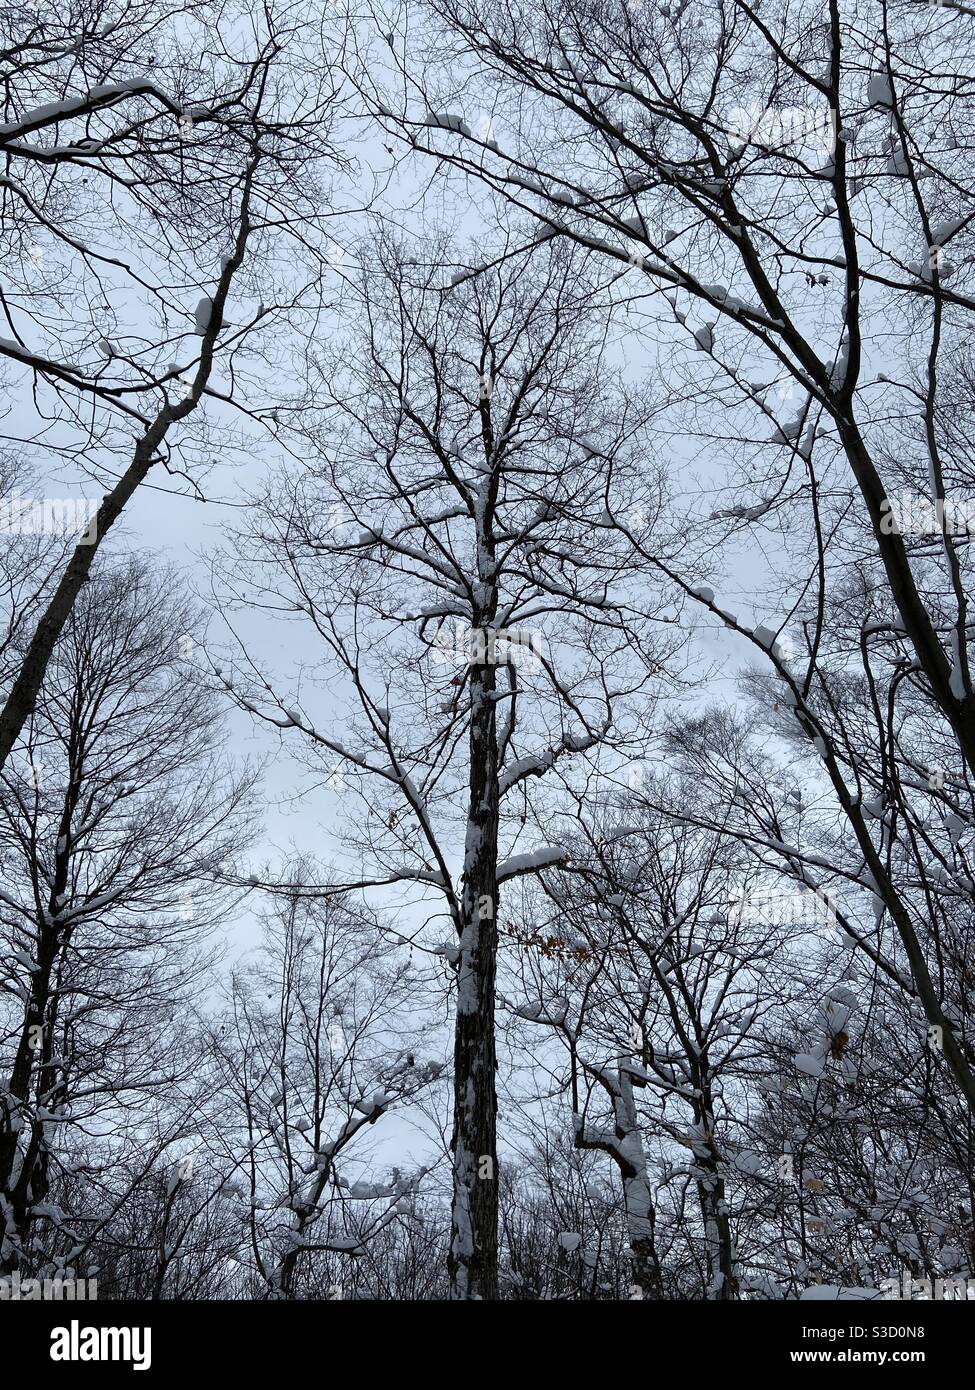 Beautiful, snowy trees in a peaceful wintery forest in the middle of winter with snow clumps on their branches after heavy snowfall Stock Photo